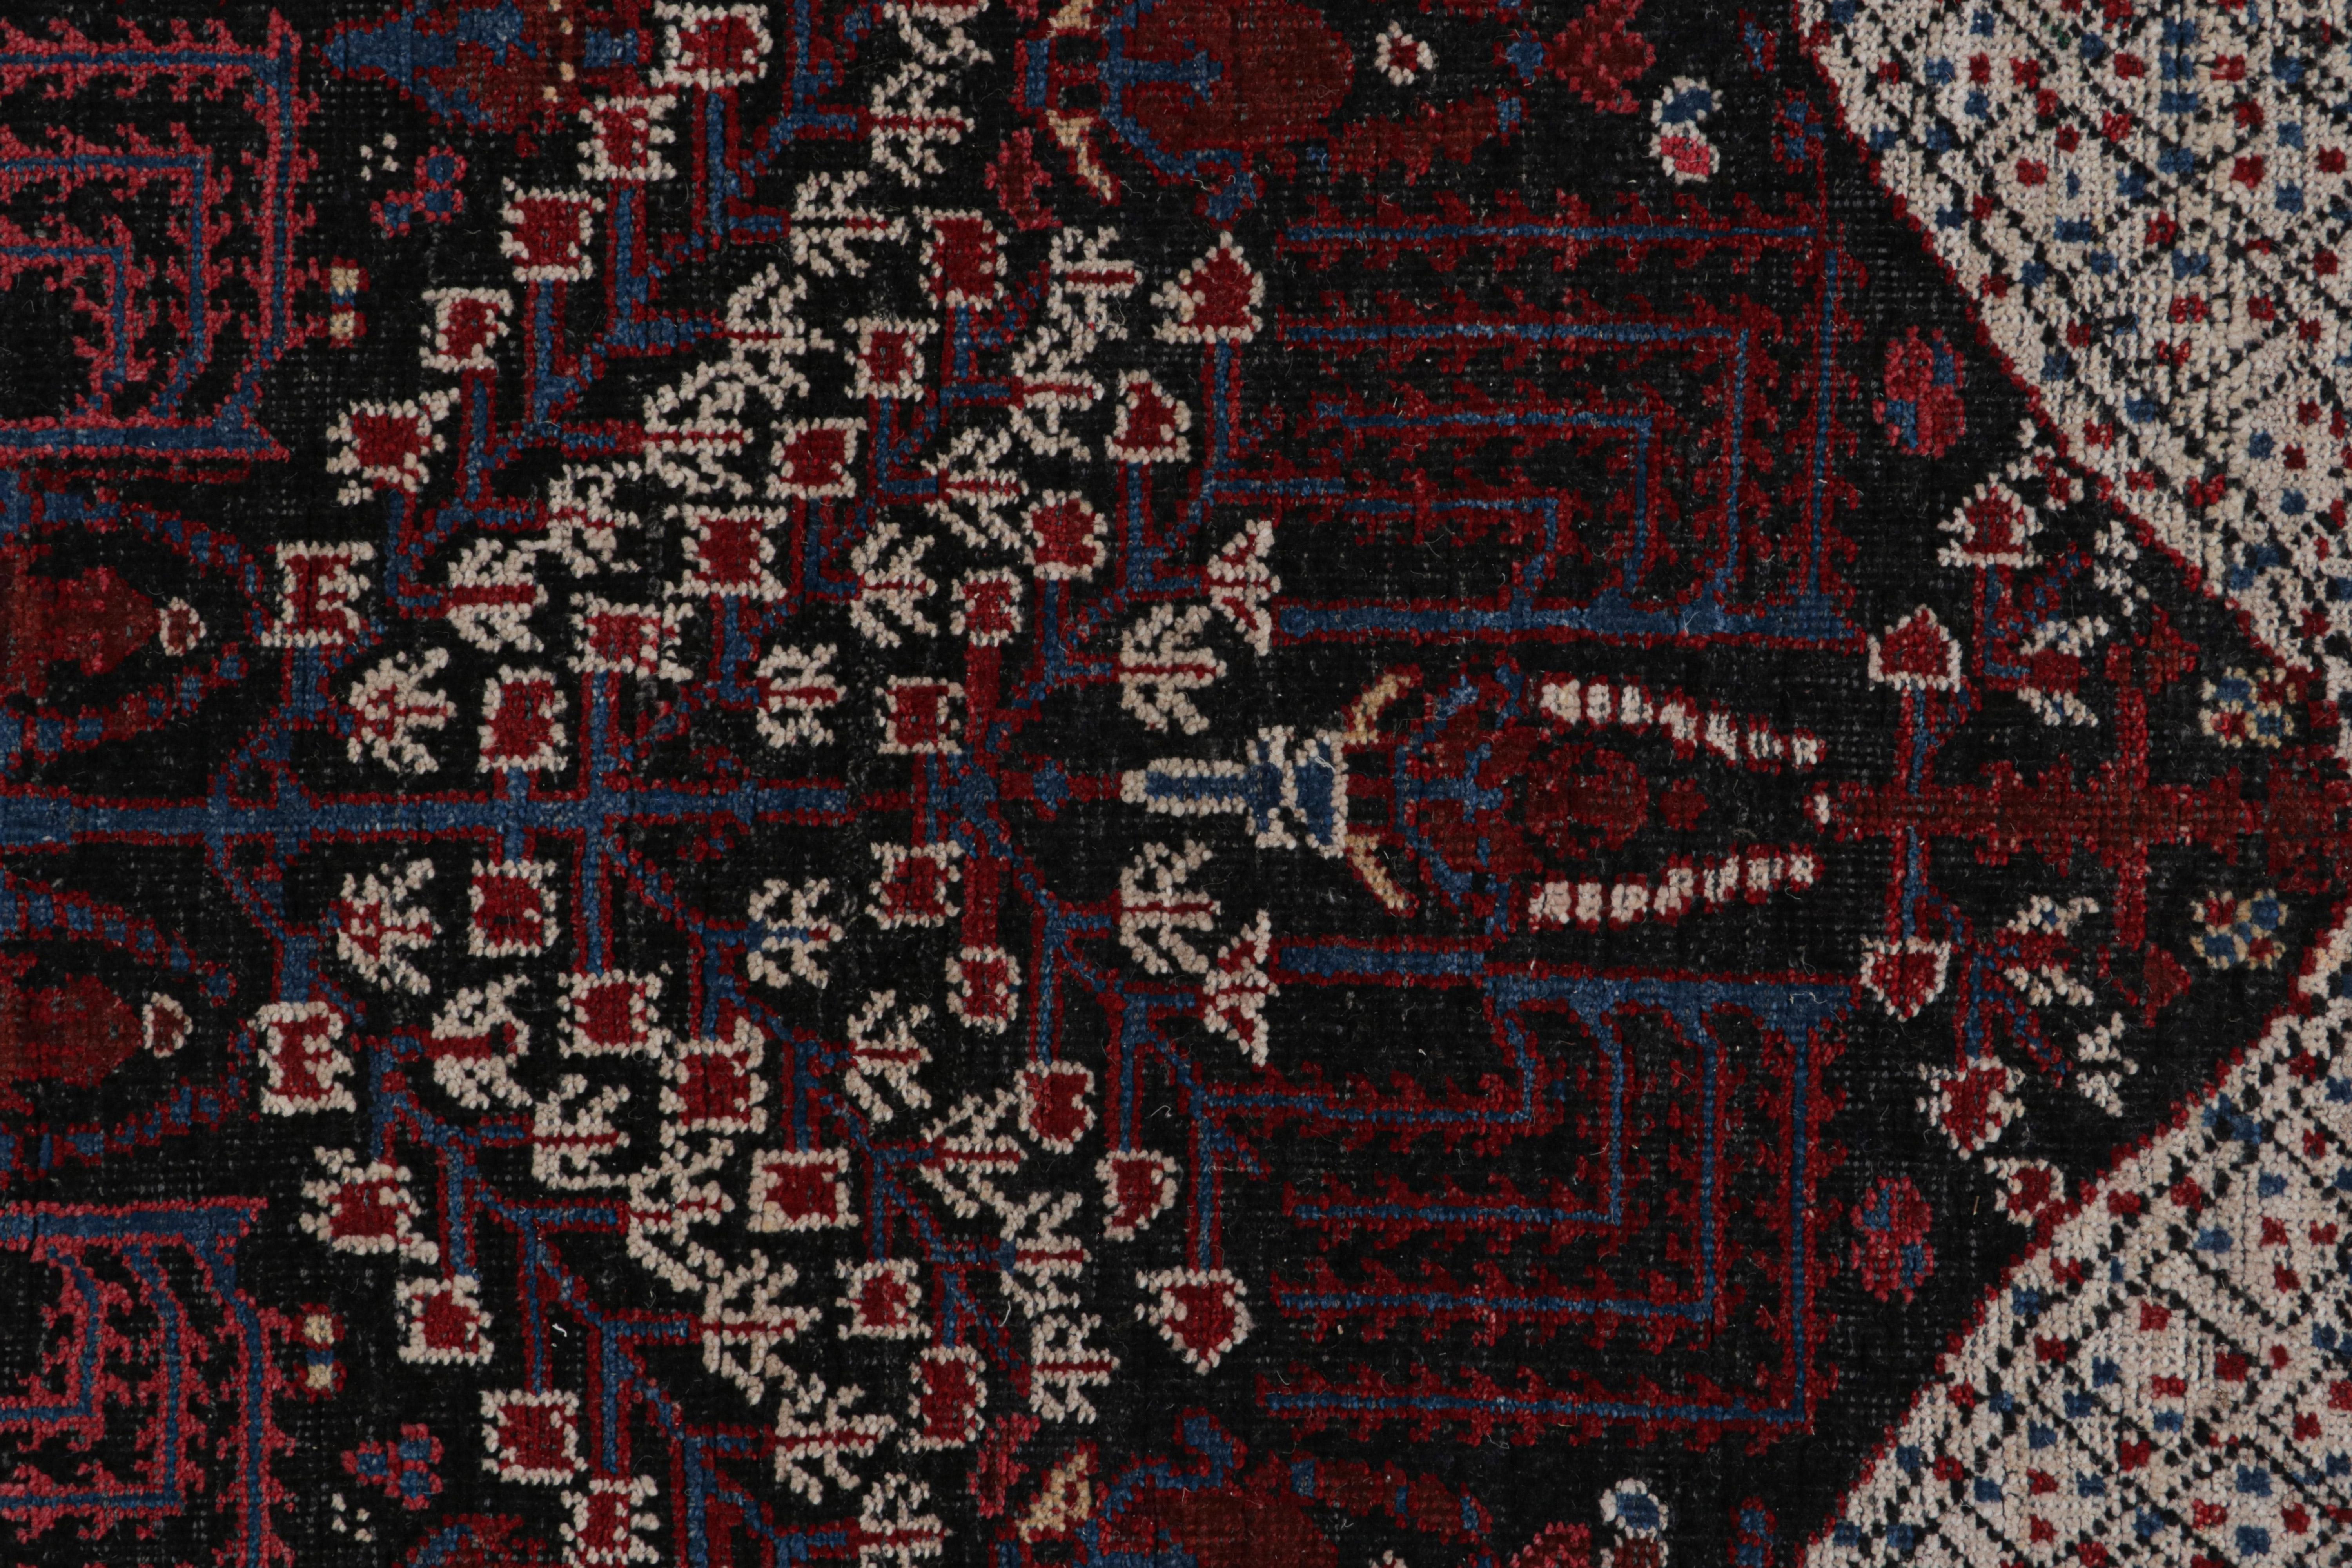 Contemporary Rug & Kilim’s Tribal Style Rug in Red, Blue & Black Geometric Patterns For Sale